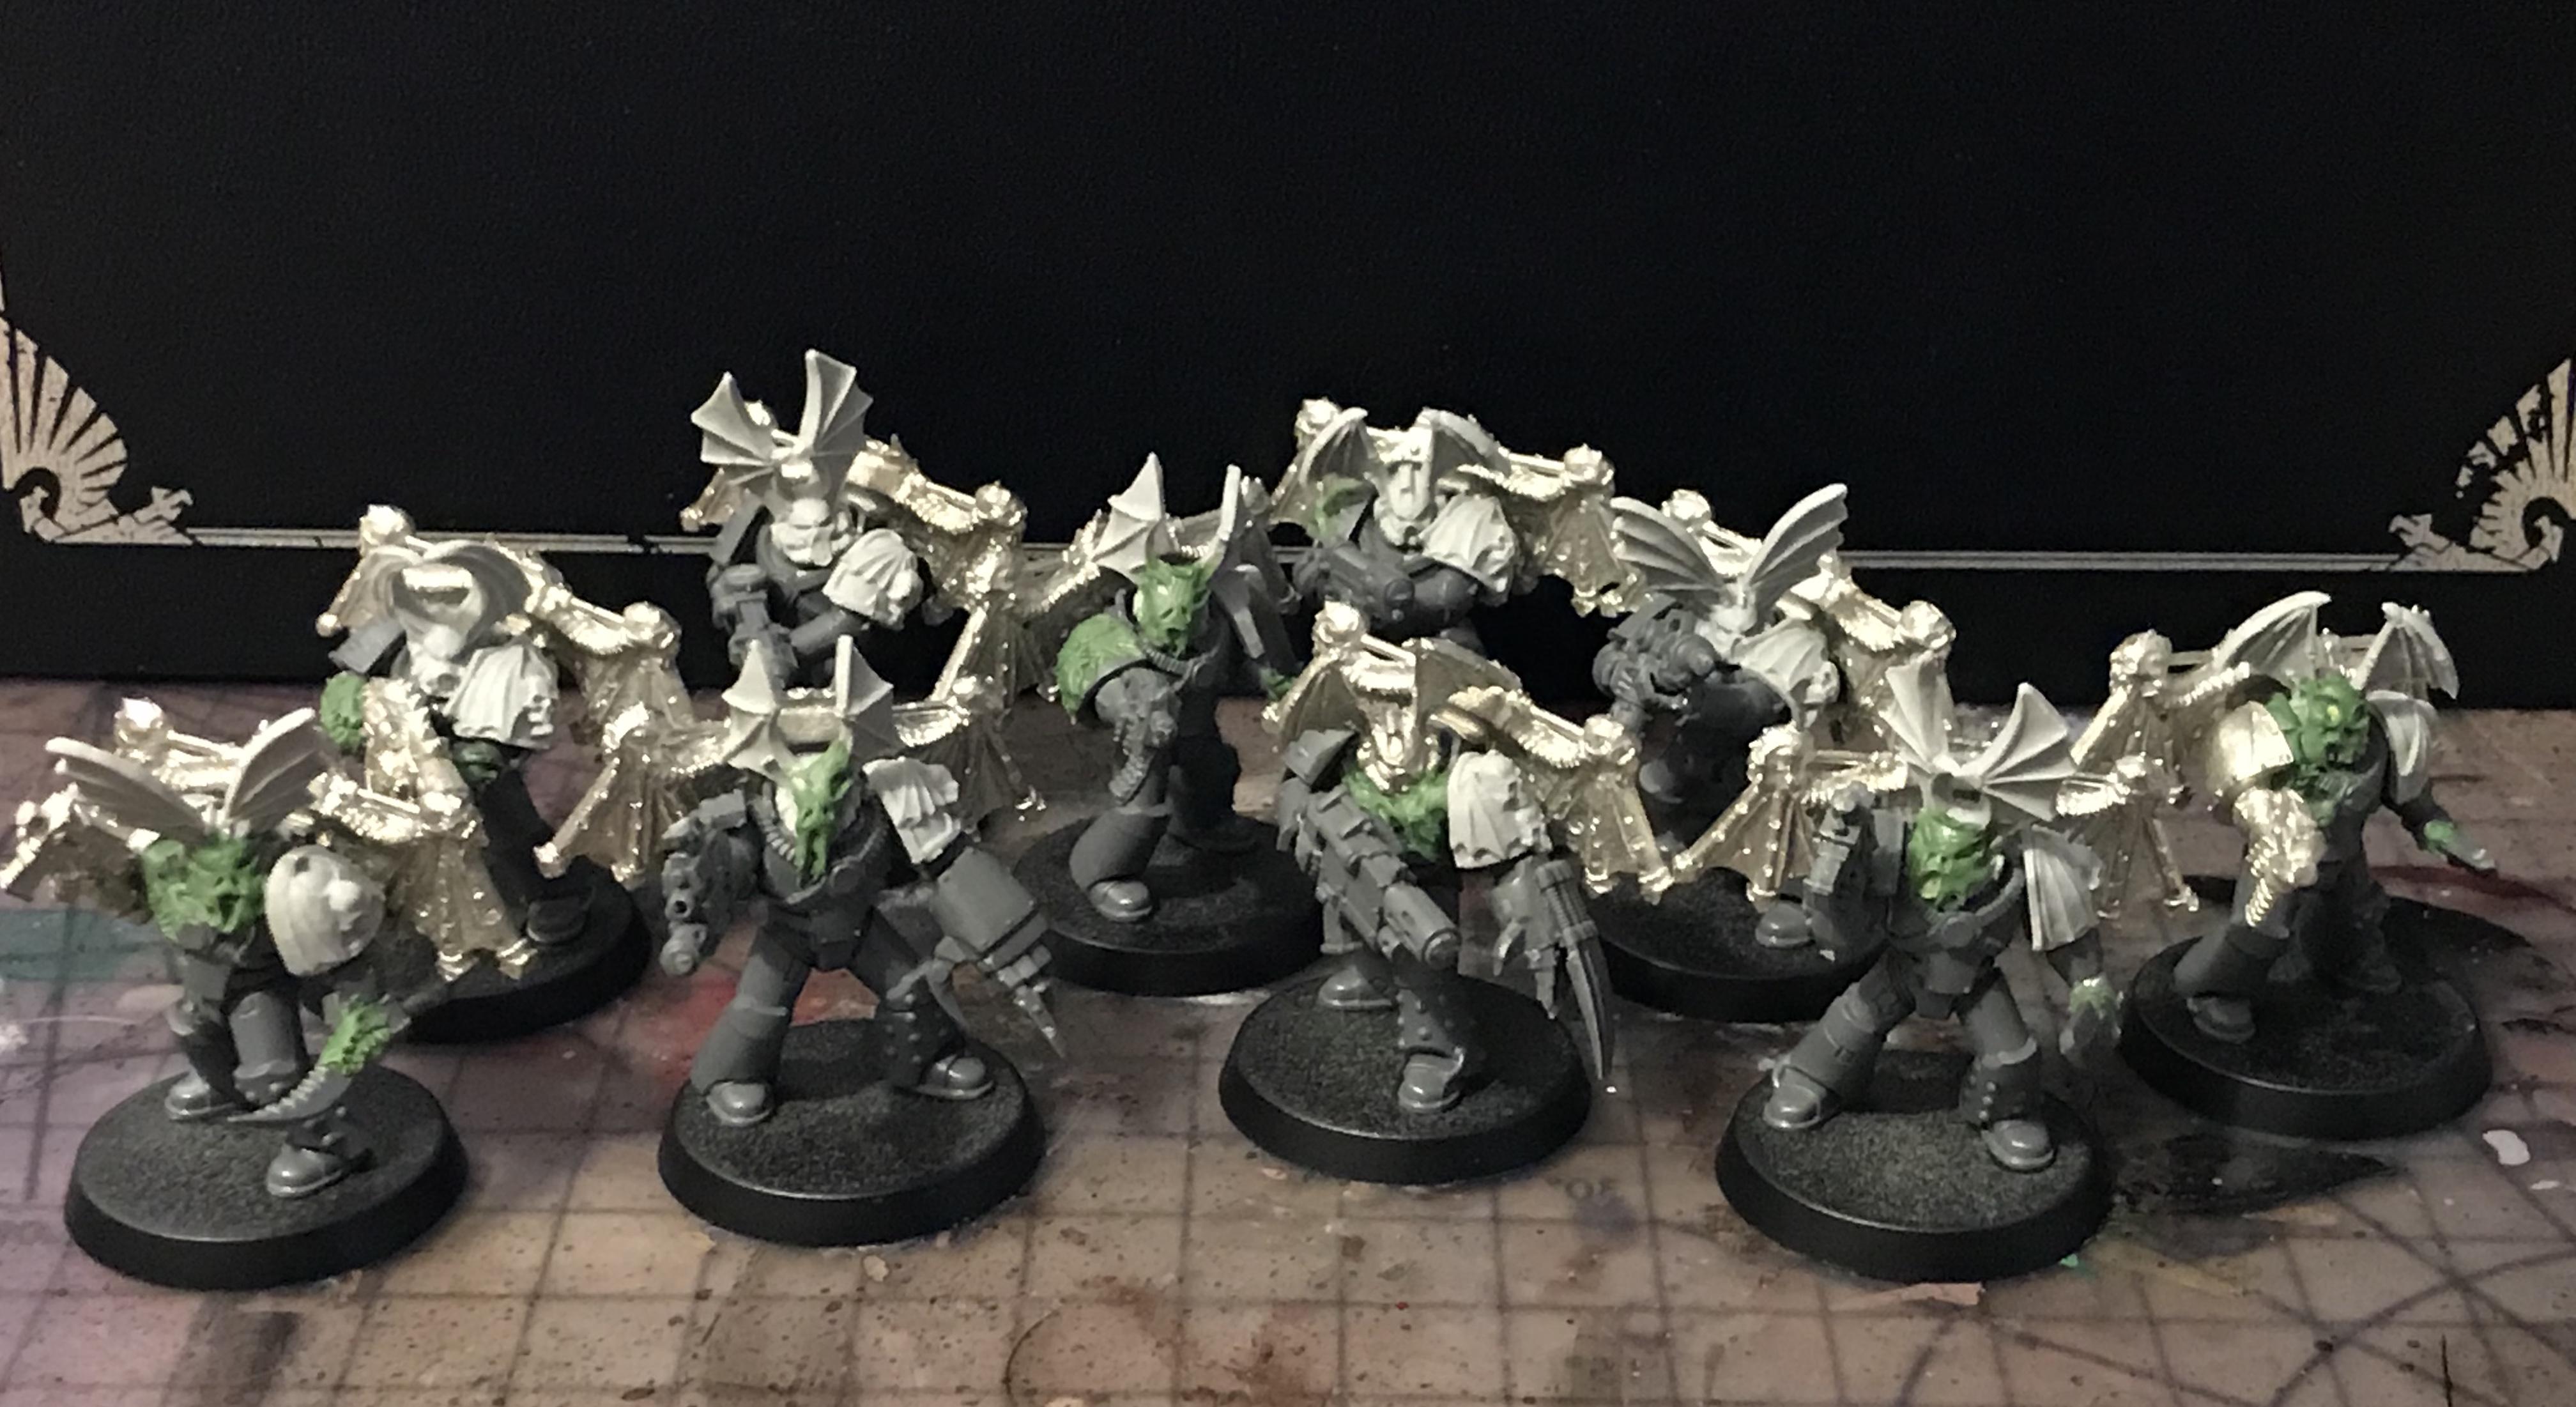 Armor, Army, Assault, Astardes, Attack, Black, Blood, Chaos, Conversion, Corrupted, Crimson, Curze, Death, Evil, Fast, Flayed, Flayer, Flesh, Green, Grisly, Hand, Heresy, Horrors, Horus, Kaos, Kill, Killers, Kit Bash, Konrad, Legion, Legionnaire, Legionnaires, Legionnes, Legions, Lightning, Lord, Lords, Man, Mask, Murder, Murderers, Night, Night Lords, Pained, Pirate, Pirates, Power, Primarch, Rage, Raiders, Raptors, Reaver, Reavers, Red, Renegade, Renegades, Saboteur, Sculpting, Shadow, Shroud, Skin, Soul, Space, Space Marines, Stalkers, Stealth, Stuff, Tactics, Team, Terror, Torture, Traitor, Traitors, Troops, Trophies, Twisted, Vile, Violence, Violent